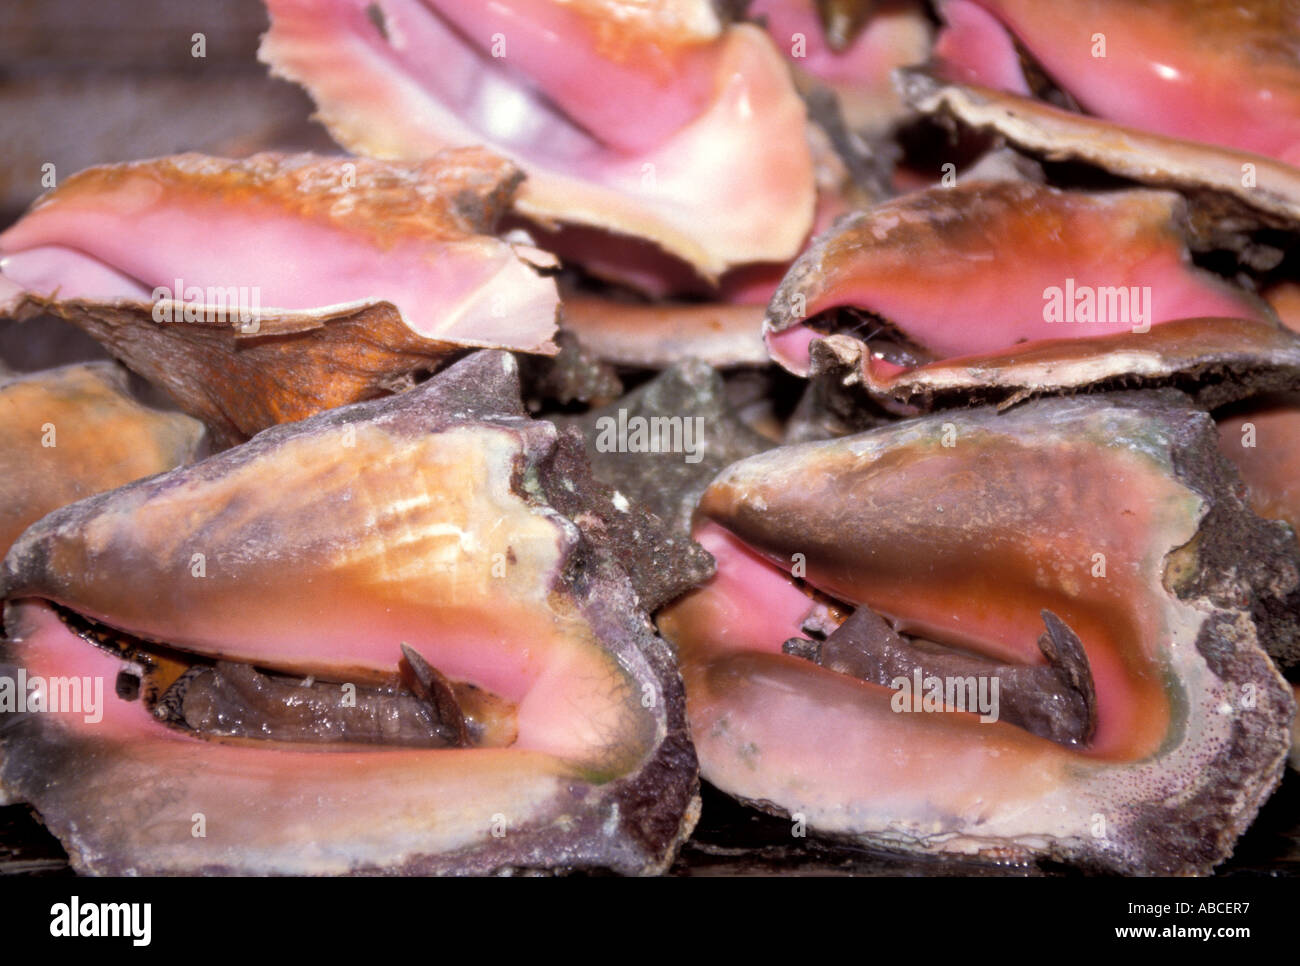 Pink queen Conch alive out of water shells with  visible snail foot  Bahamas Stock Photo